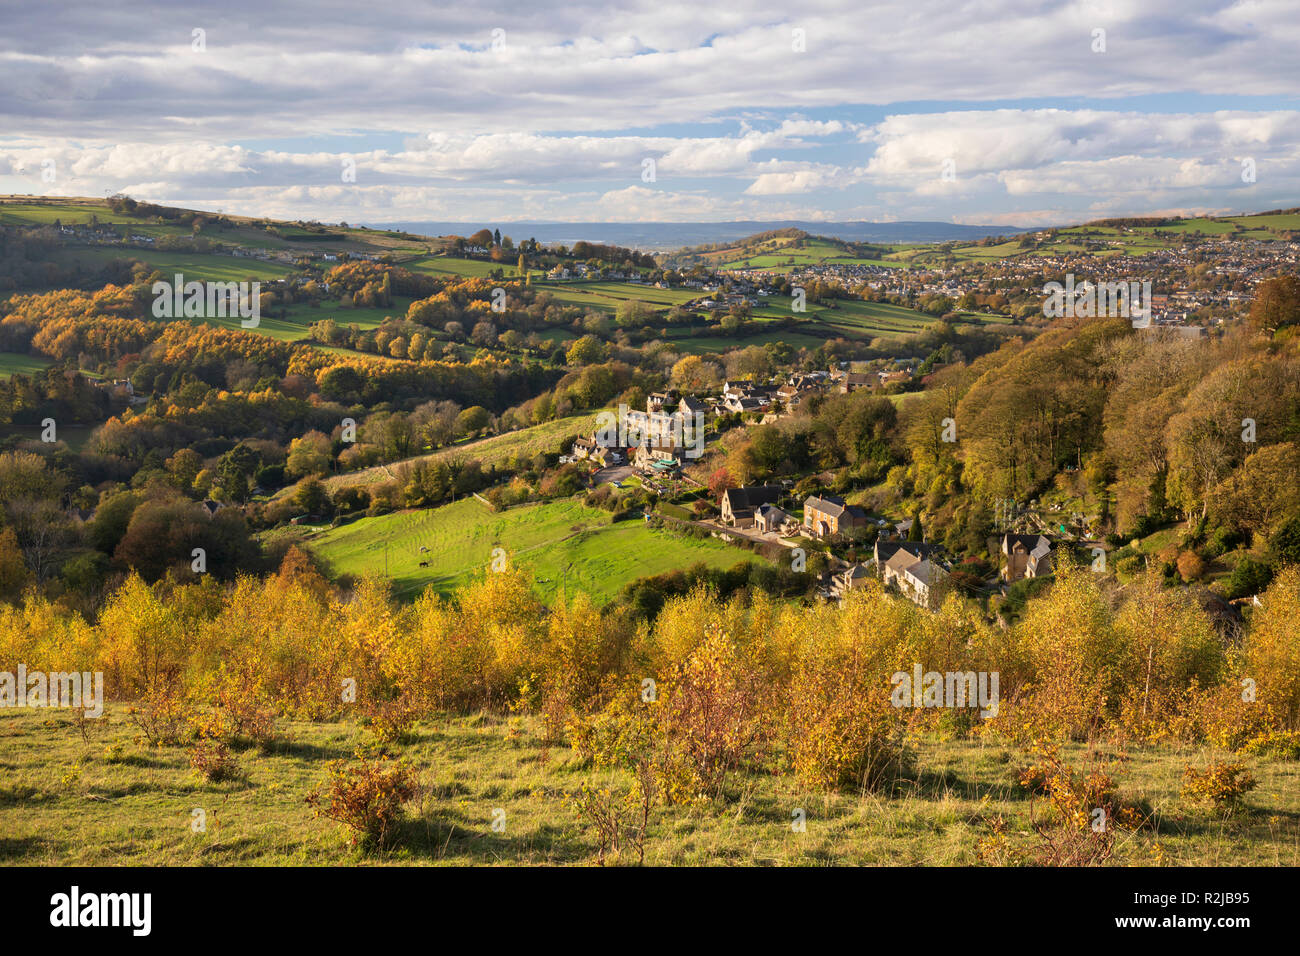 View over Cotswold landscape on autumn afternoon from Rodborough Common, Stroud, Cotswolds, Gloucestershire, England, United Kingdom, Europe Stock Photo